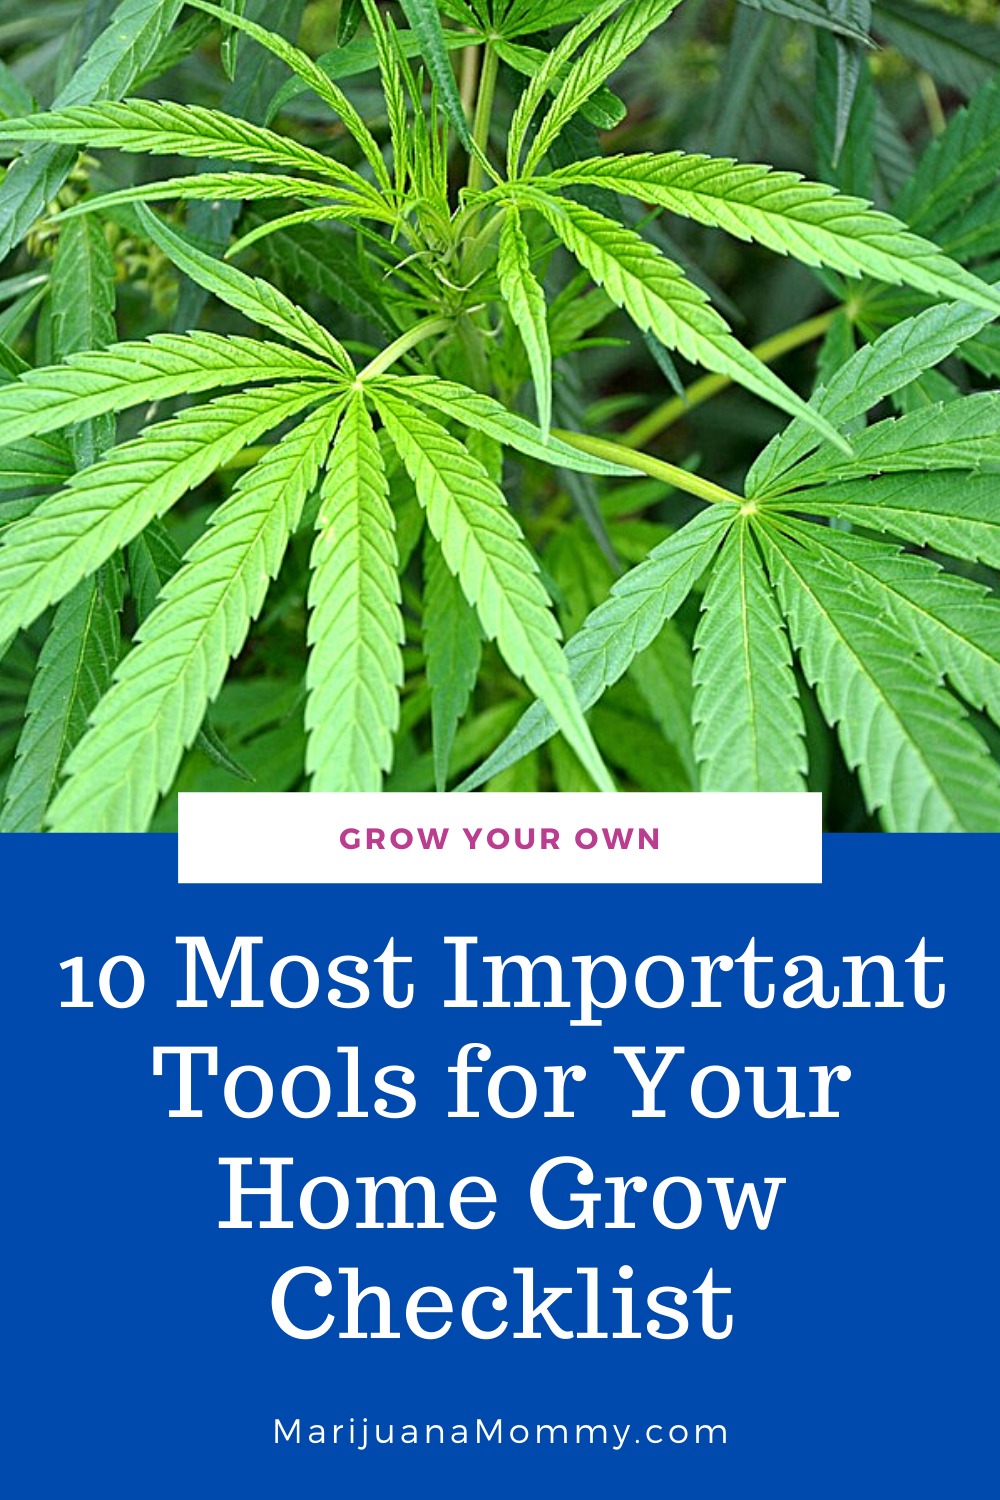 10 Important Tools You Need to Start Growing Cannabis At Home